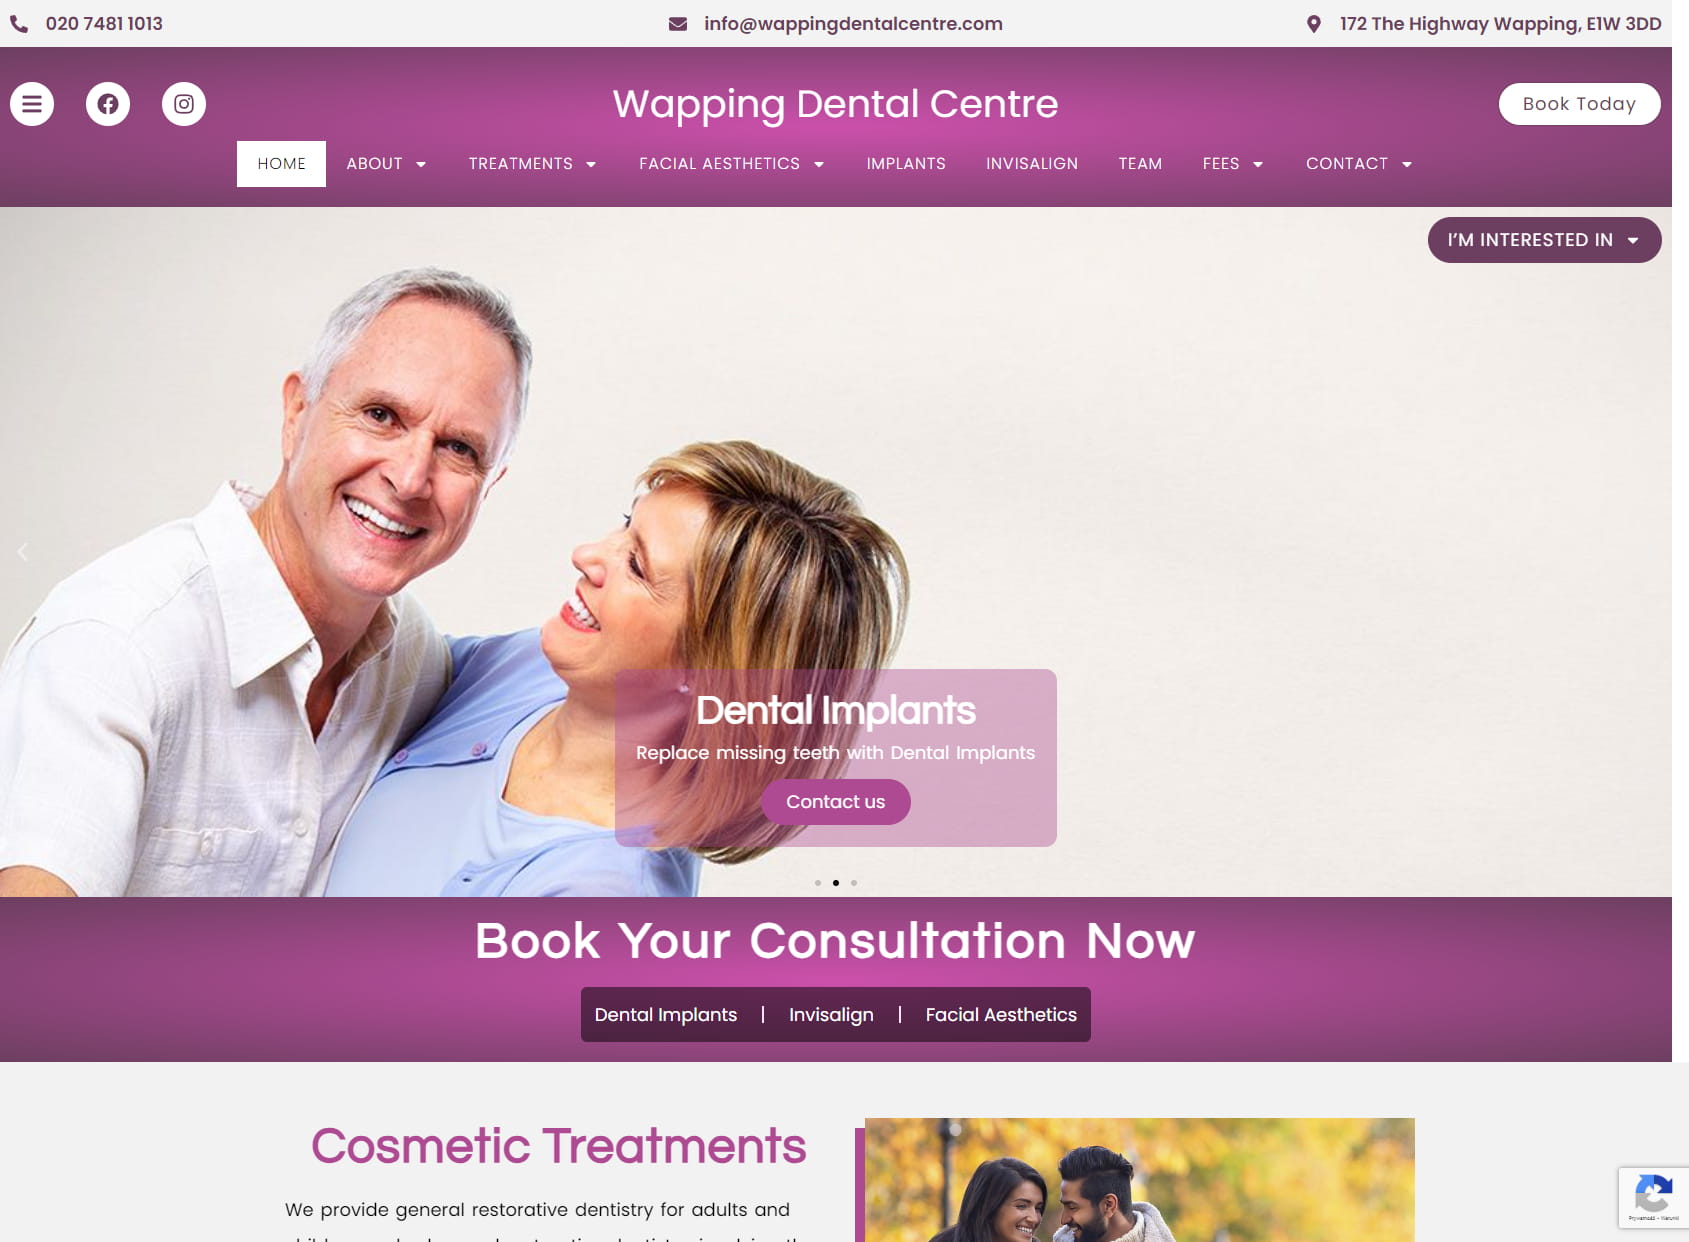 Wapping Dental Centre